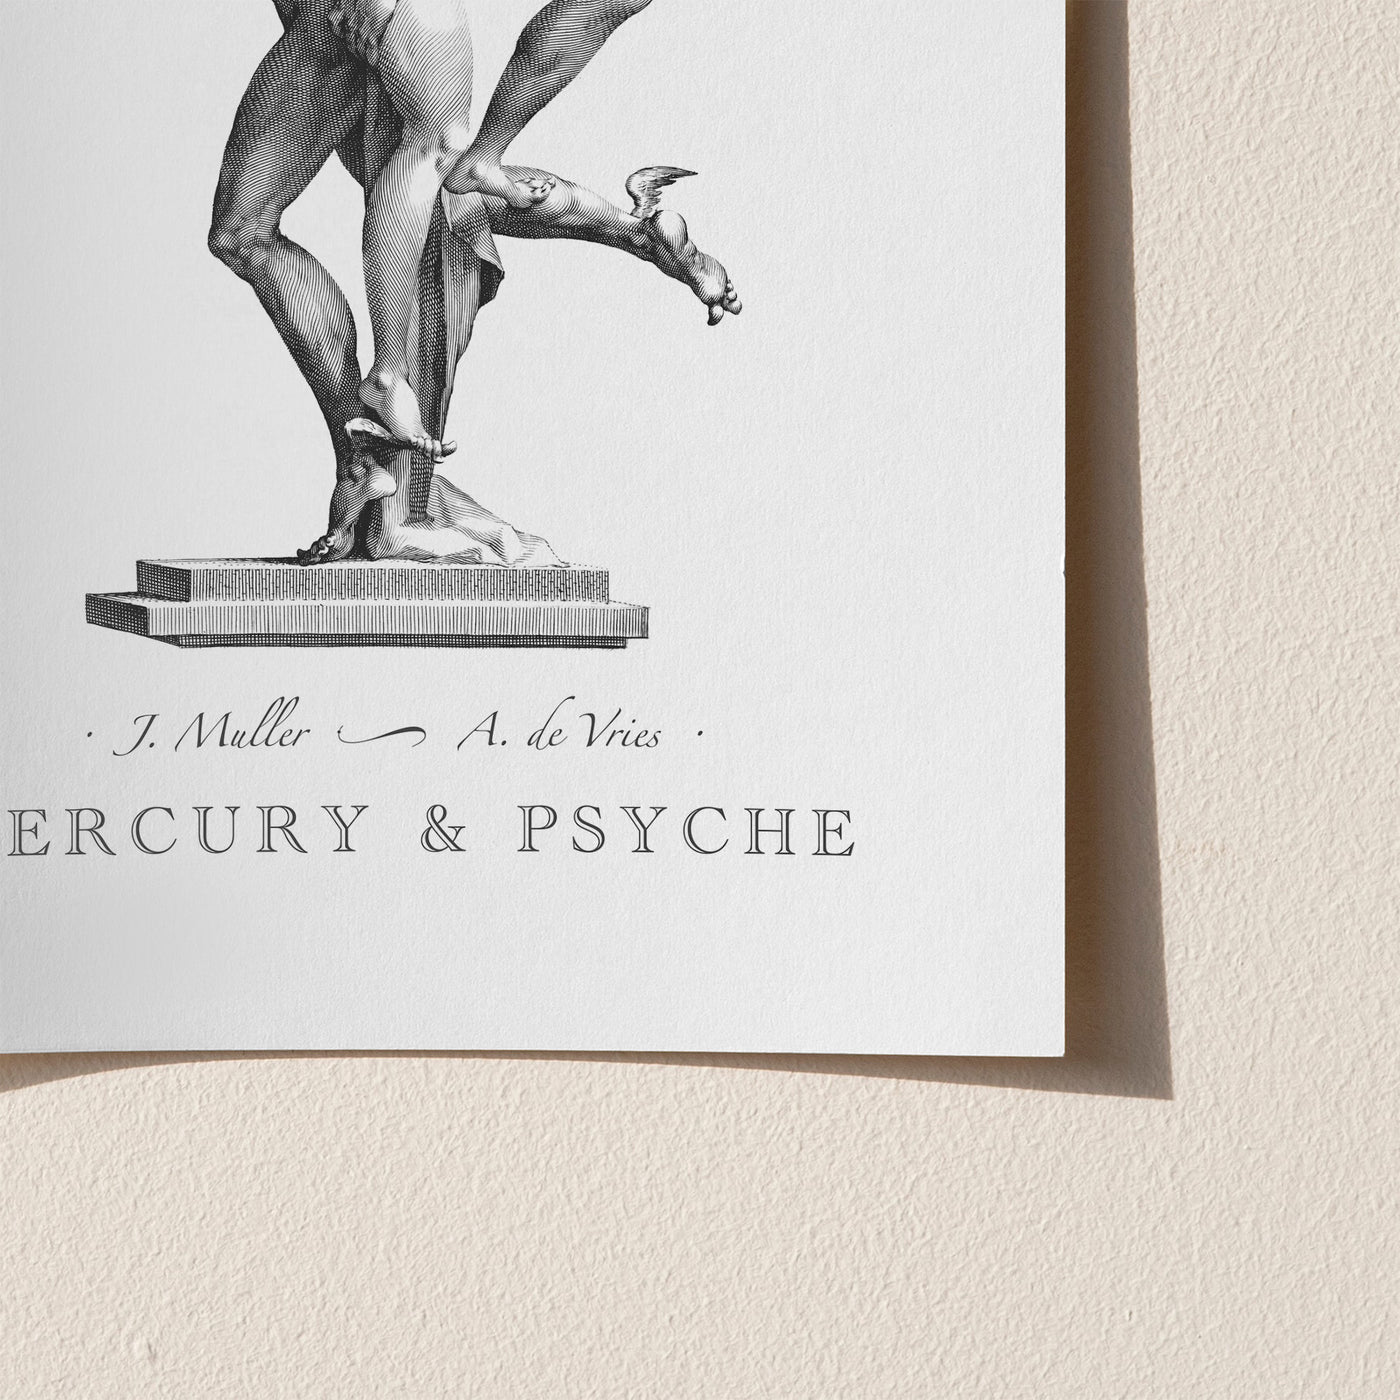 Mercury and Psyche engraving